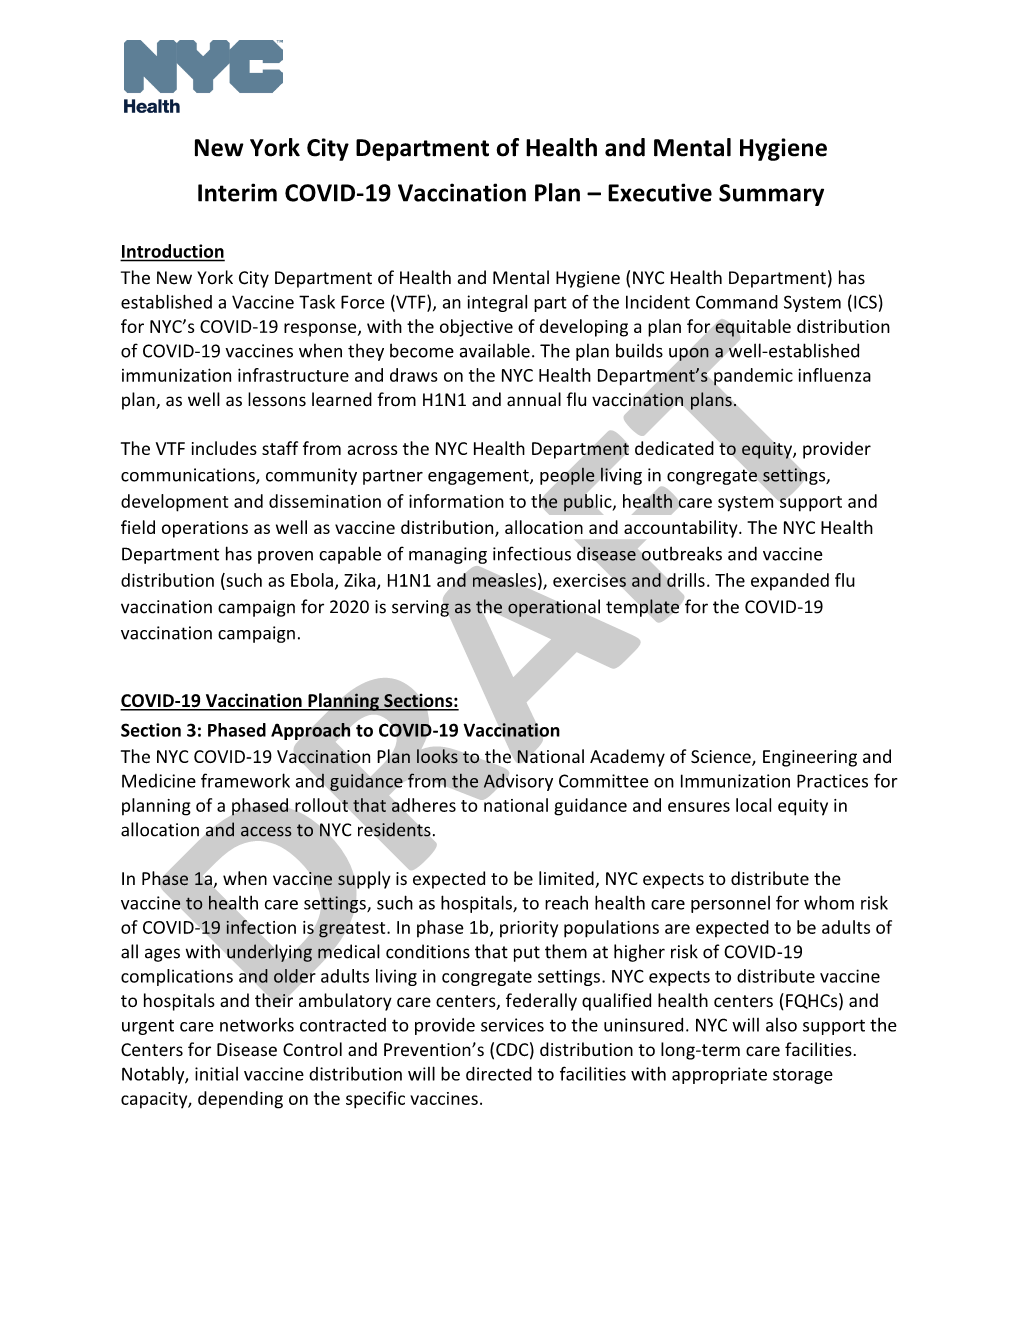 New York City Department of Health and Mental Hygiene Interim COVID-19 Vaccination Plan – Executive Summary